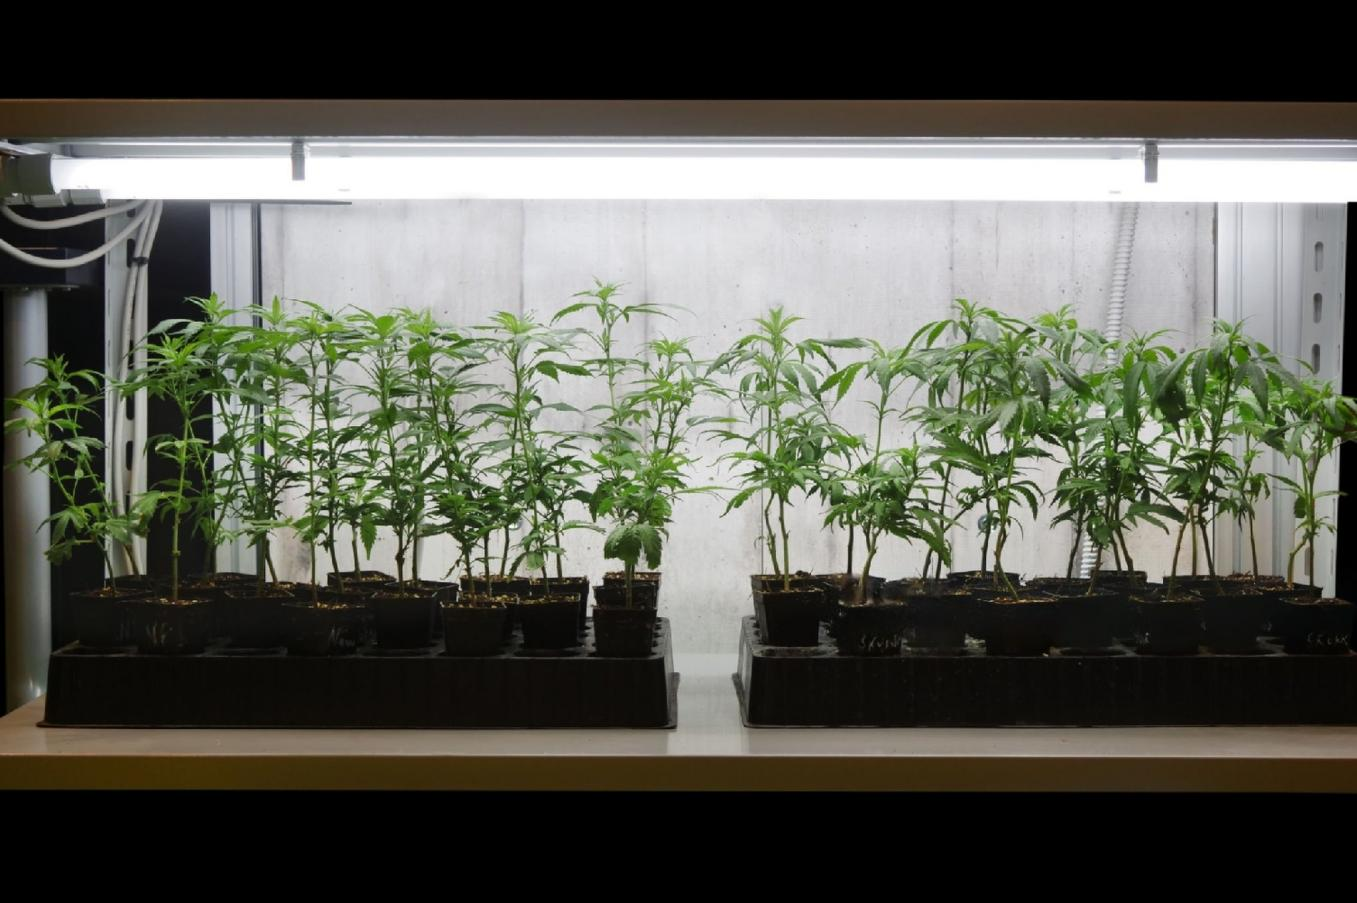 Can You Use Regular Fluorescent  Light to Grow Plants?